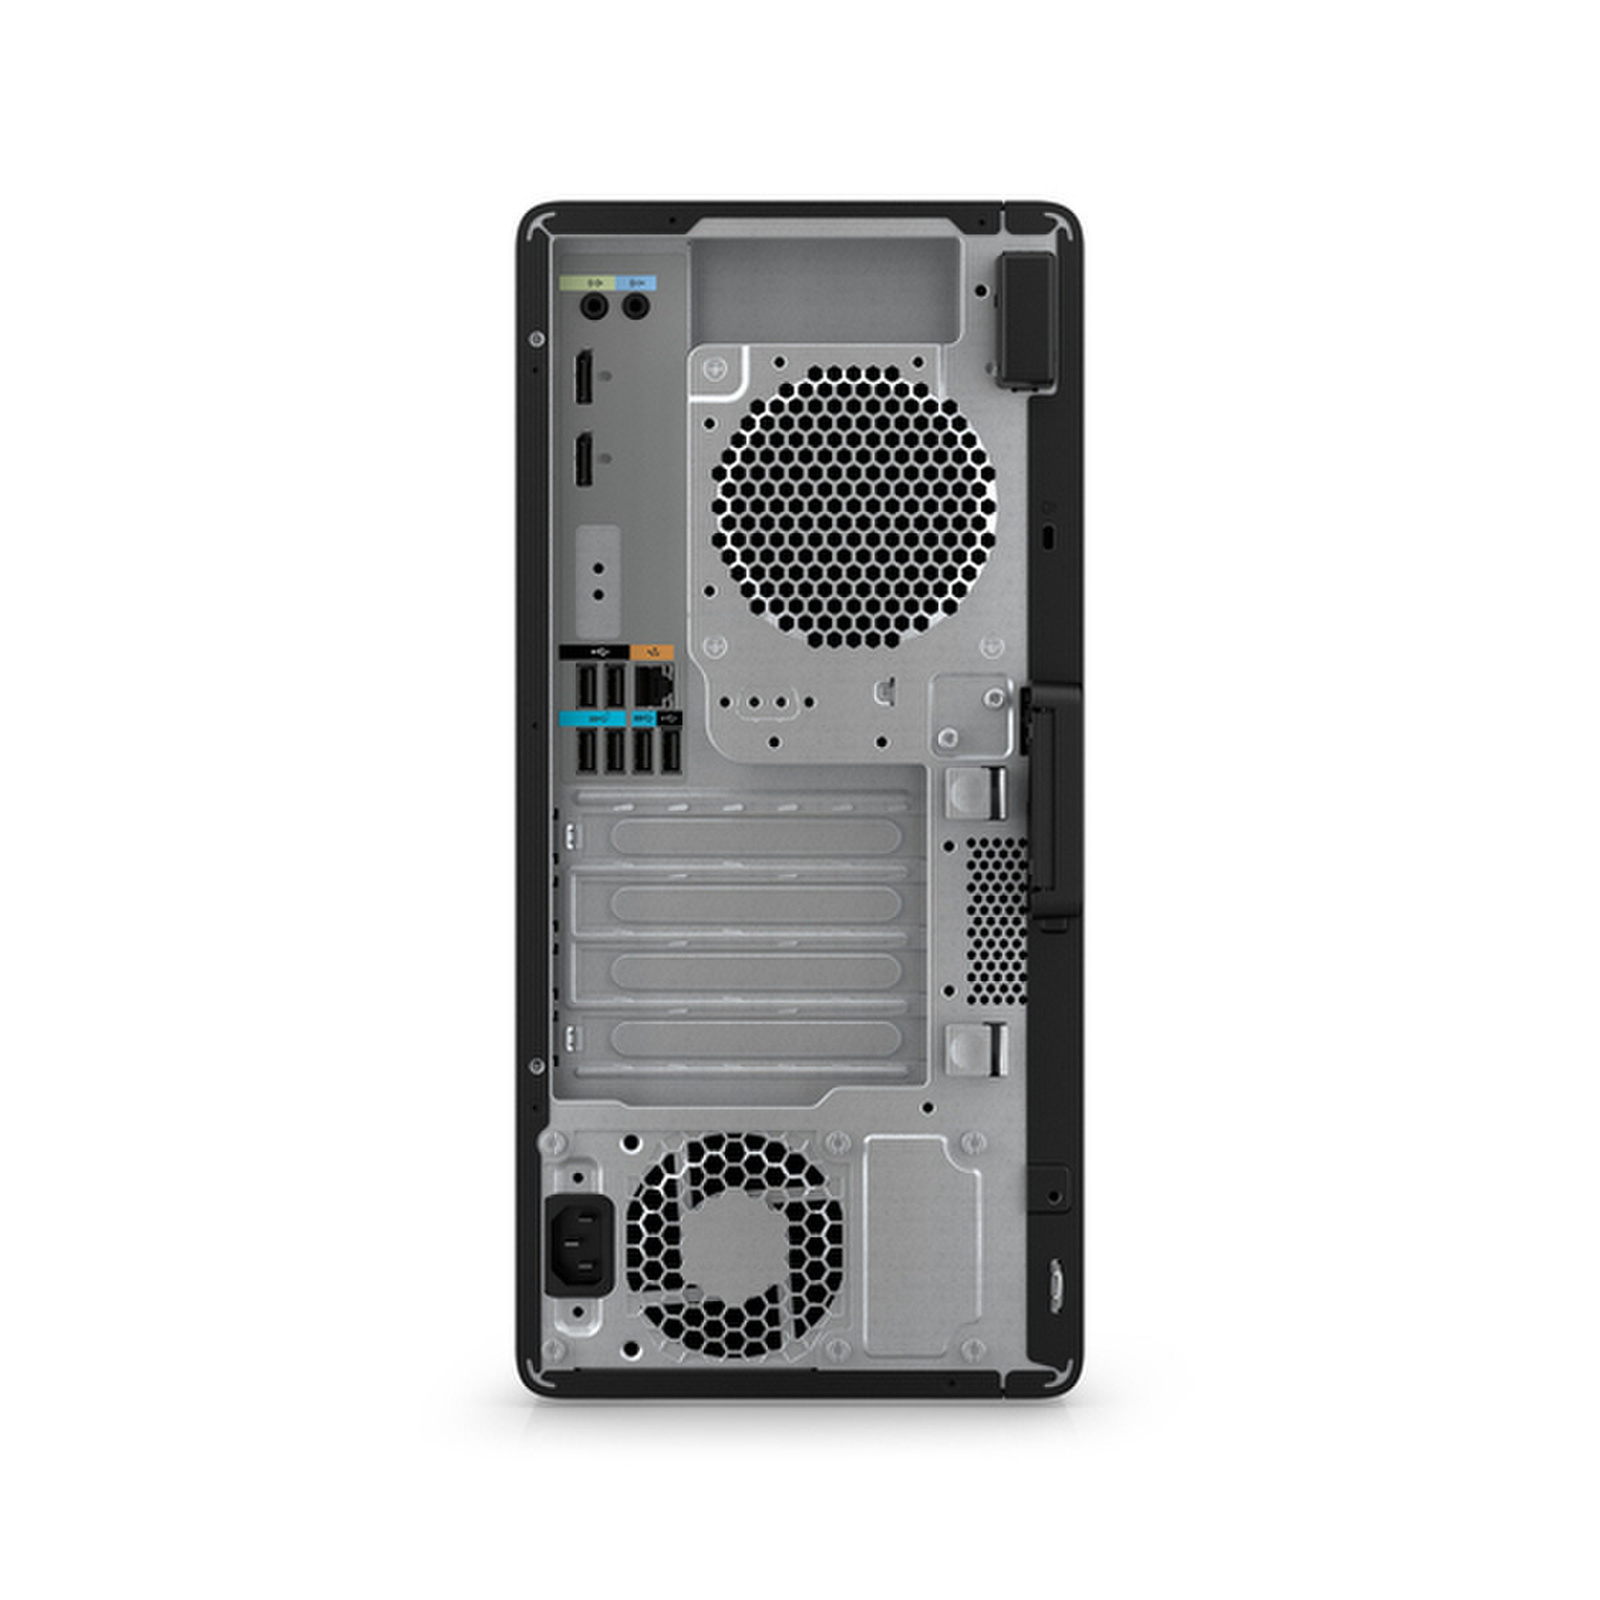 Buy the HP Z2 Tower G9 Workstation PC Intel Core i5 12500 - 16GB